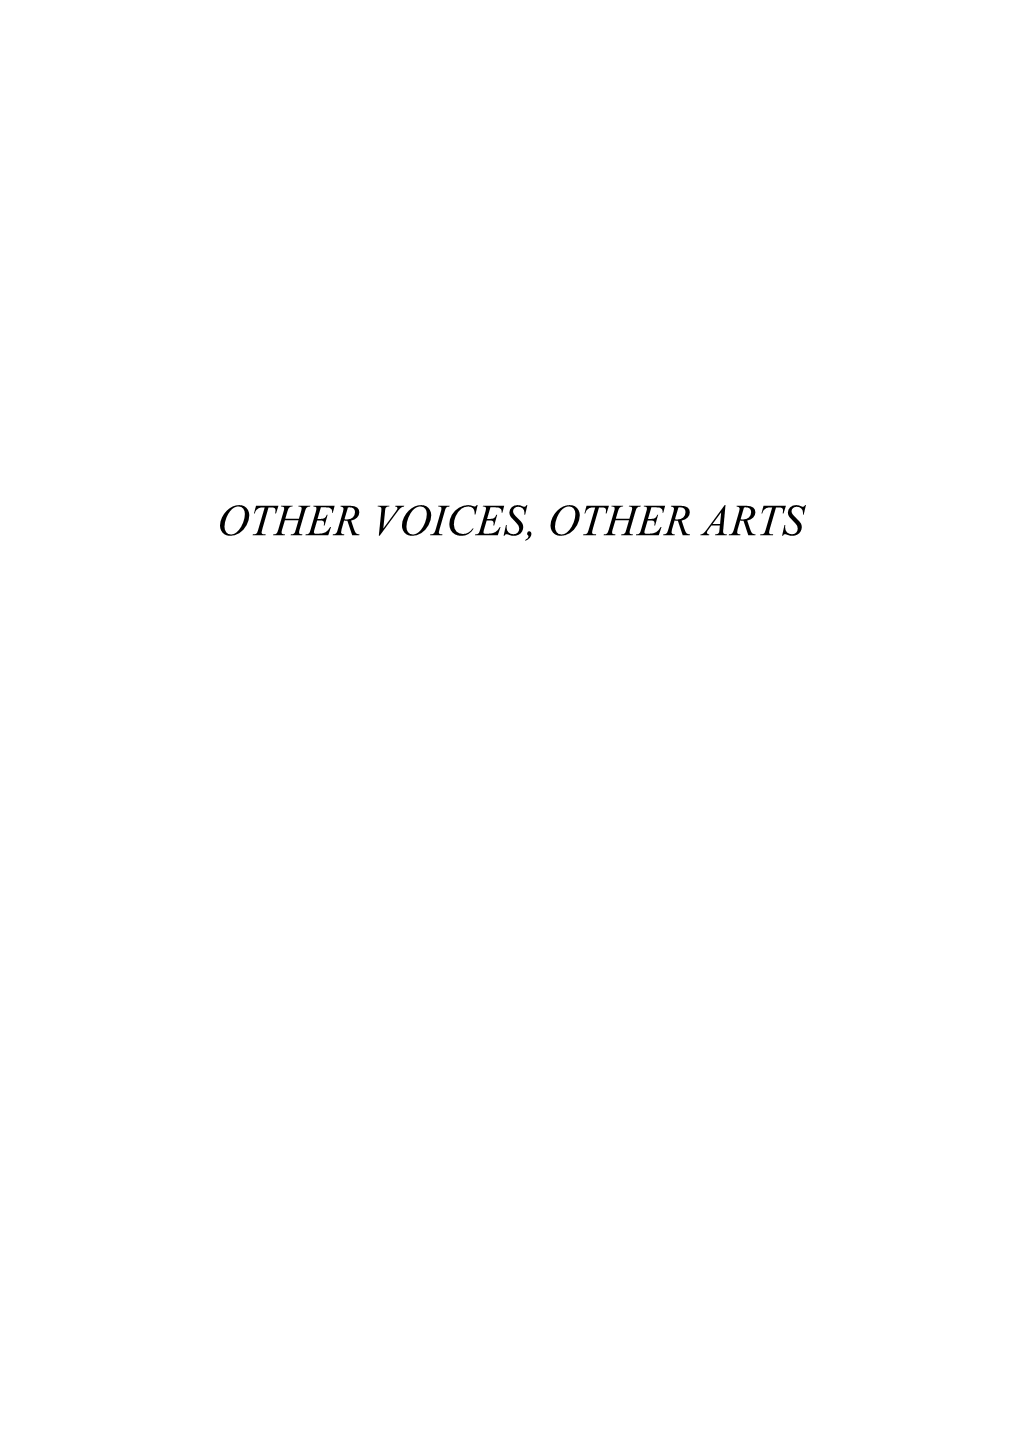 Other Voices, Other Arts